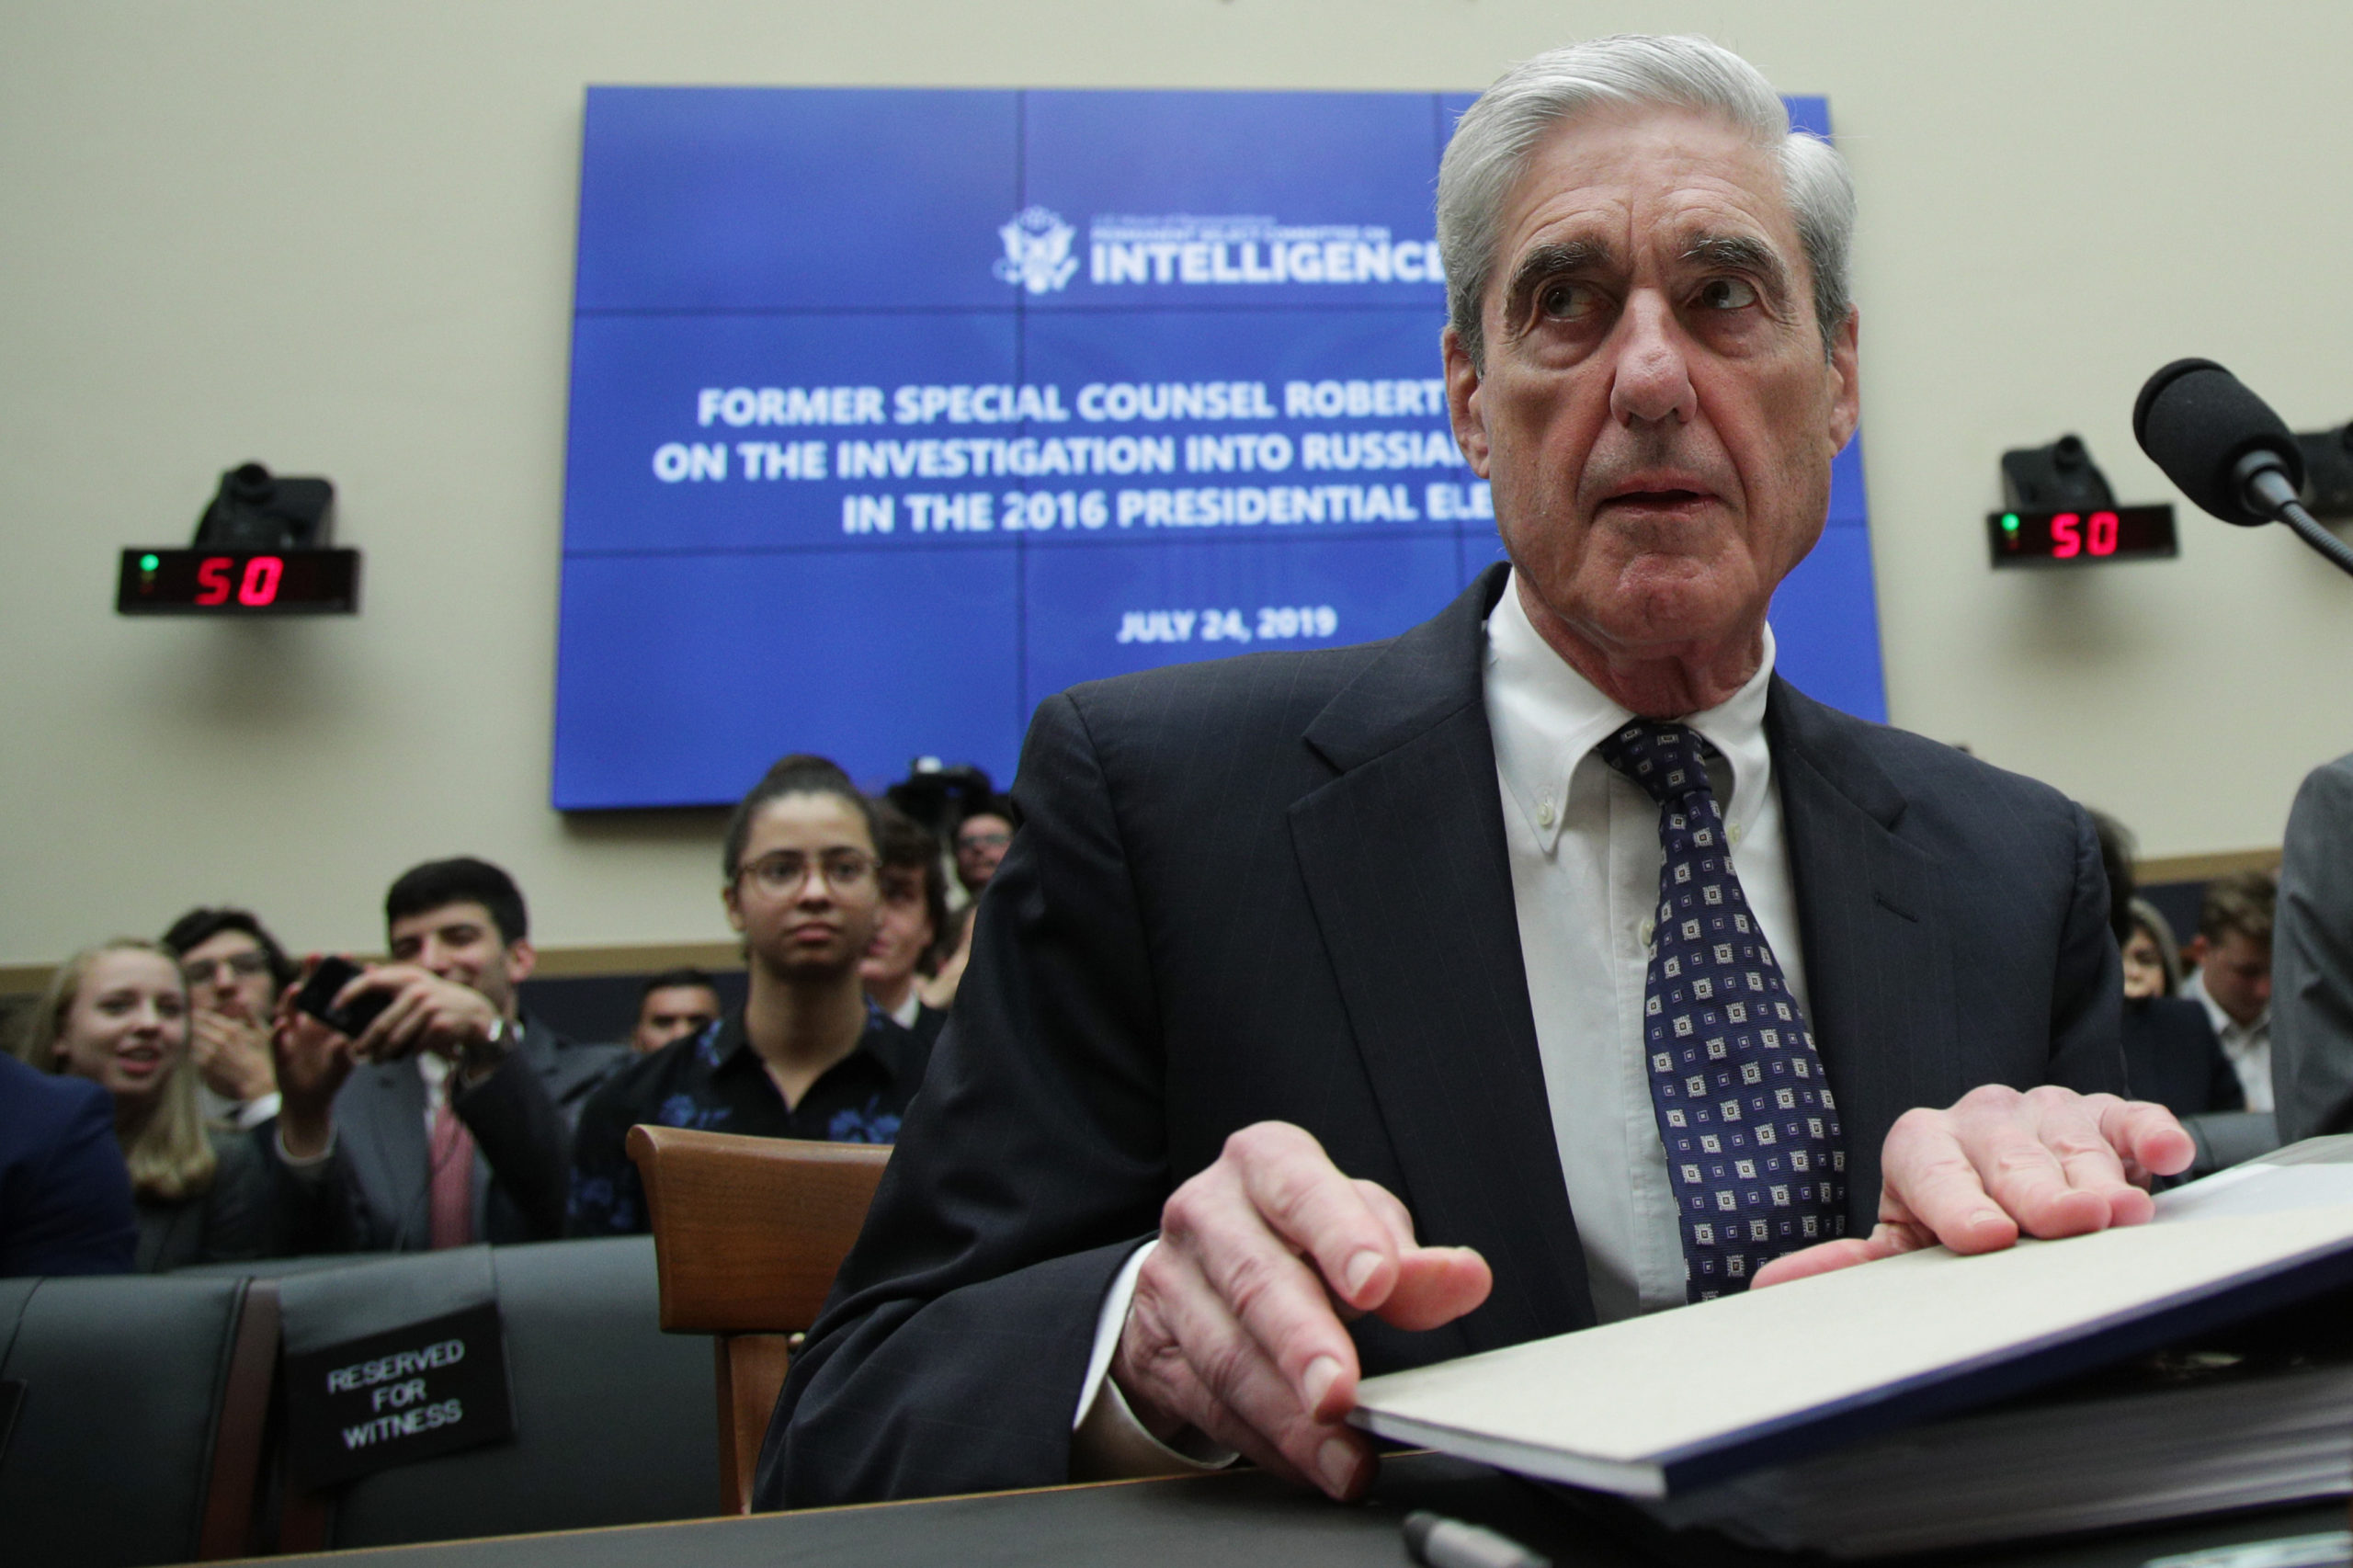 WASHINGTON, DC - JULY 24: Former Special Counsel Robert Mueller waits to testify before the House Intelligence Committee about his report on Russian interference in the 2016 presidential election in the Rayburn House Office Building July 24, 2019 in Washington, DC. Mueller testified earlier in the day before the House Judiciary Committee in back-to-back hearings on Capitol Hill. (Photo by Alex Wong/Getty Images)